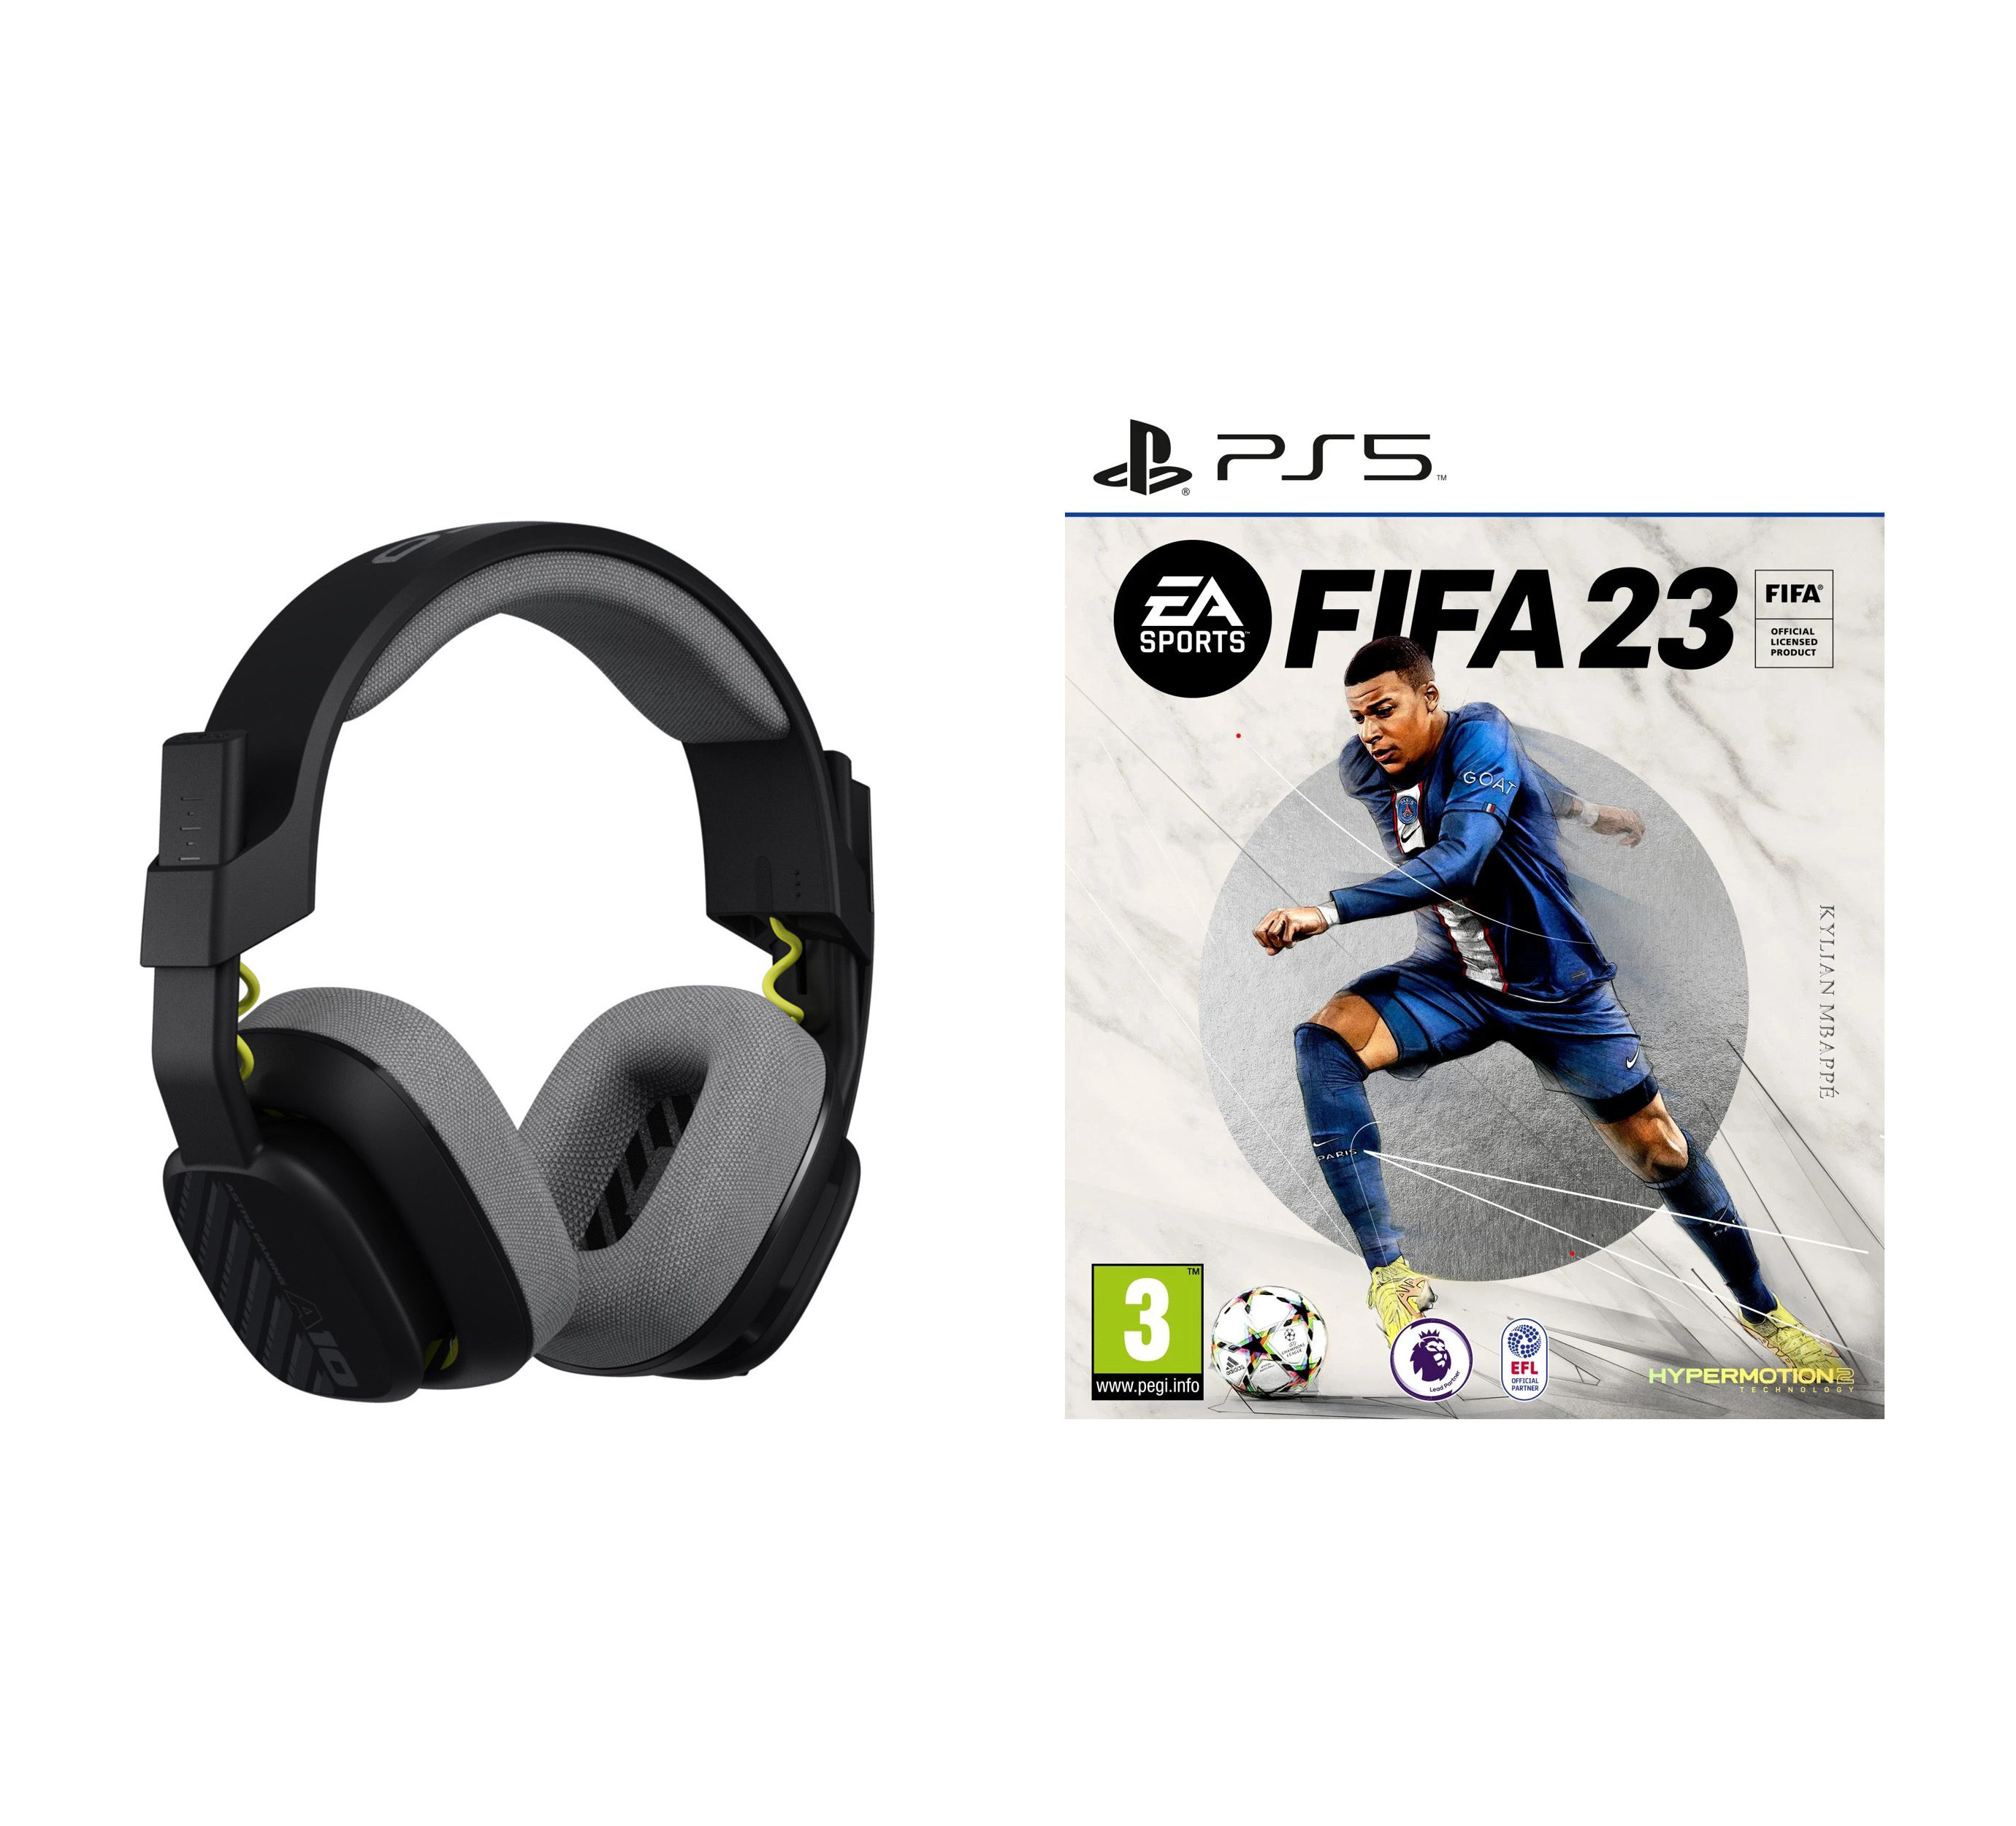 Astro - A10 Gen 2 Wired Gaming headset forPS4/PS5 + FIFA 23